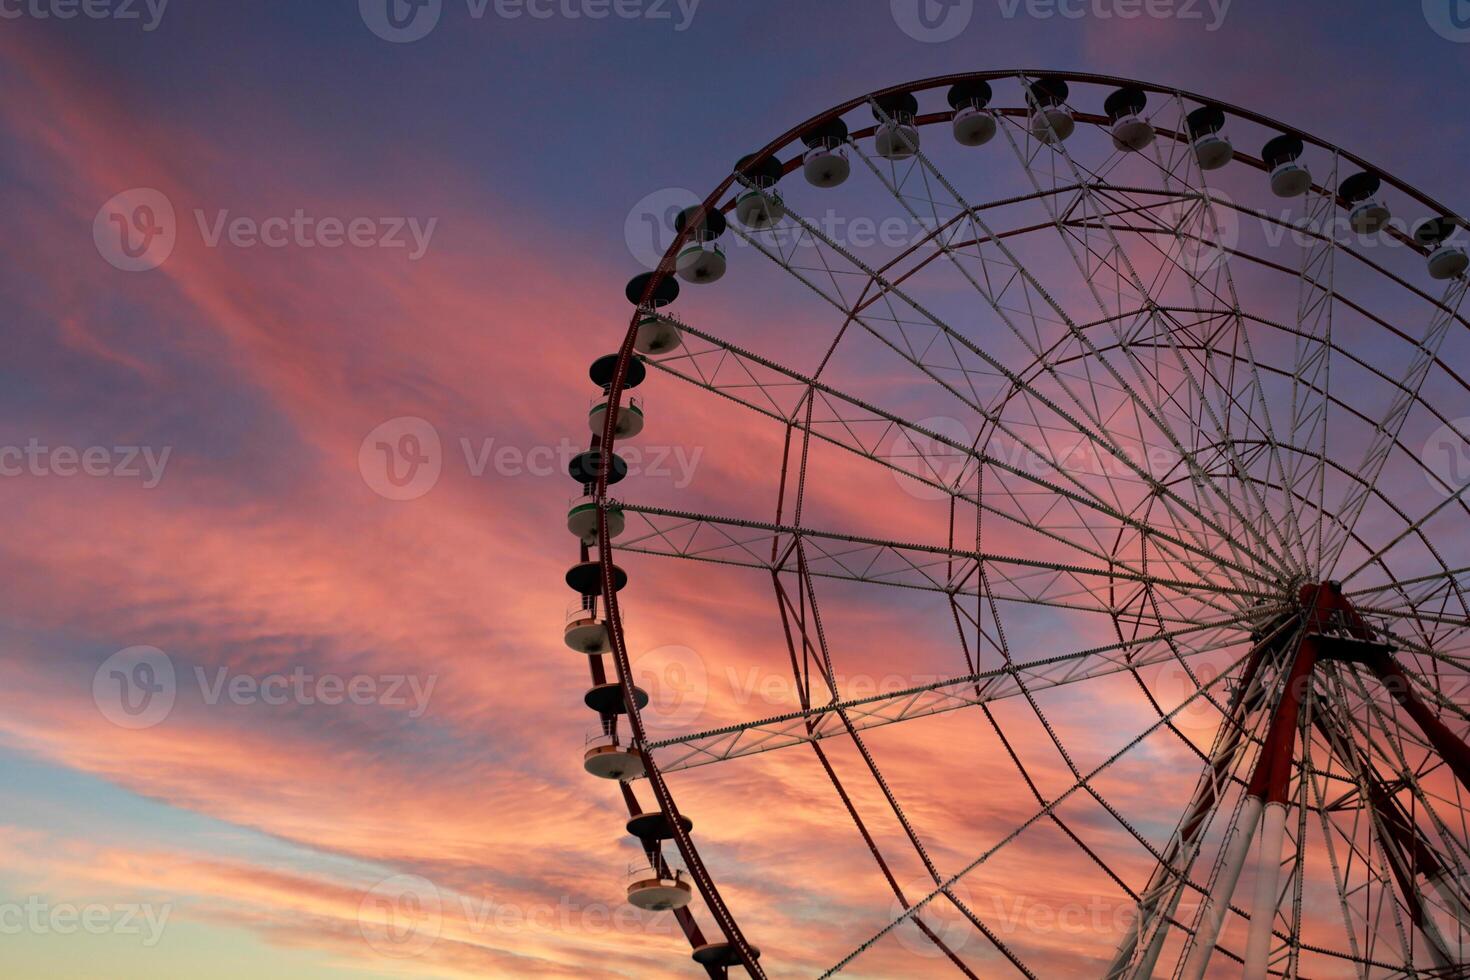 Ferris wheel in a playground in Batumi Square. Amazing and fanfastic sky. photo